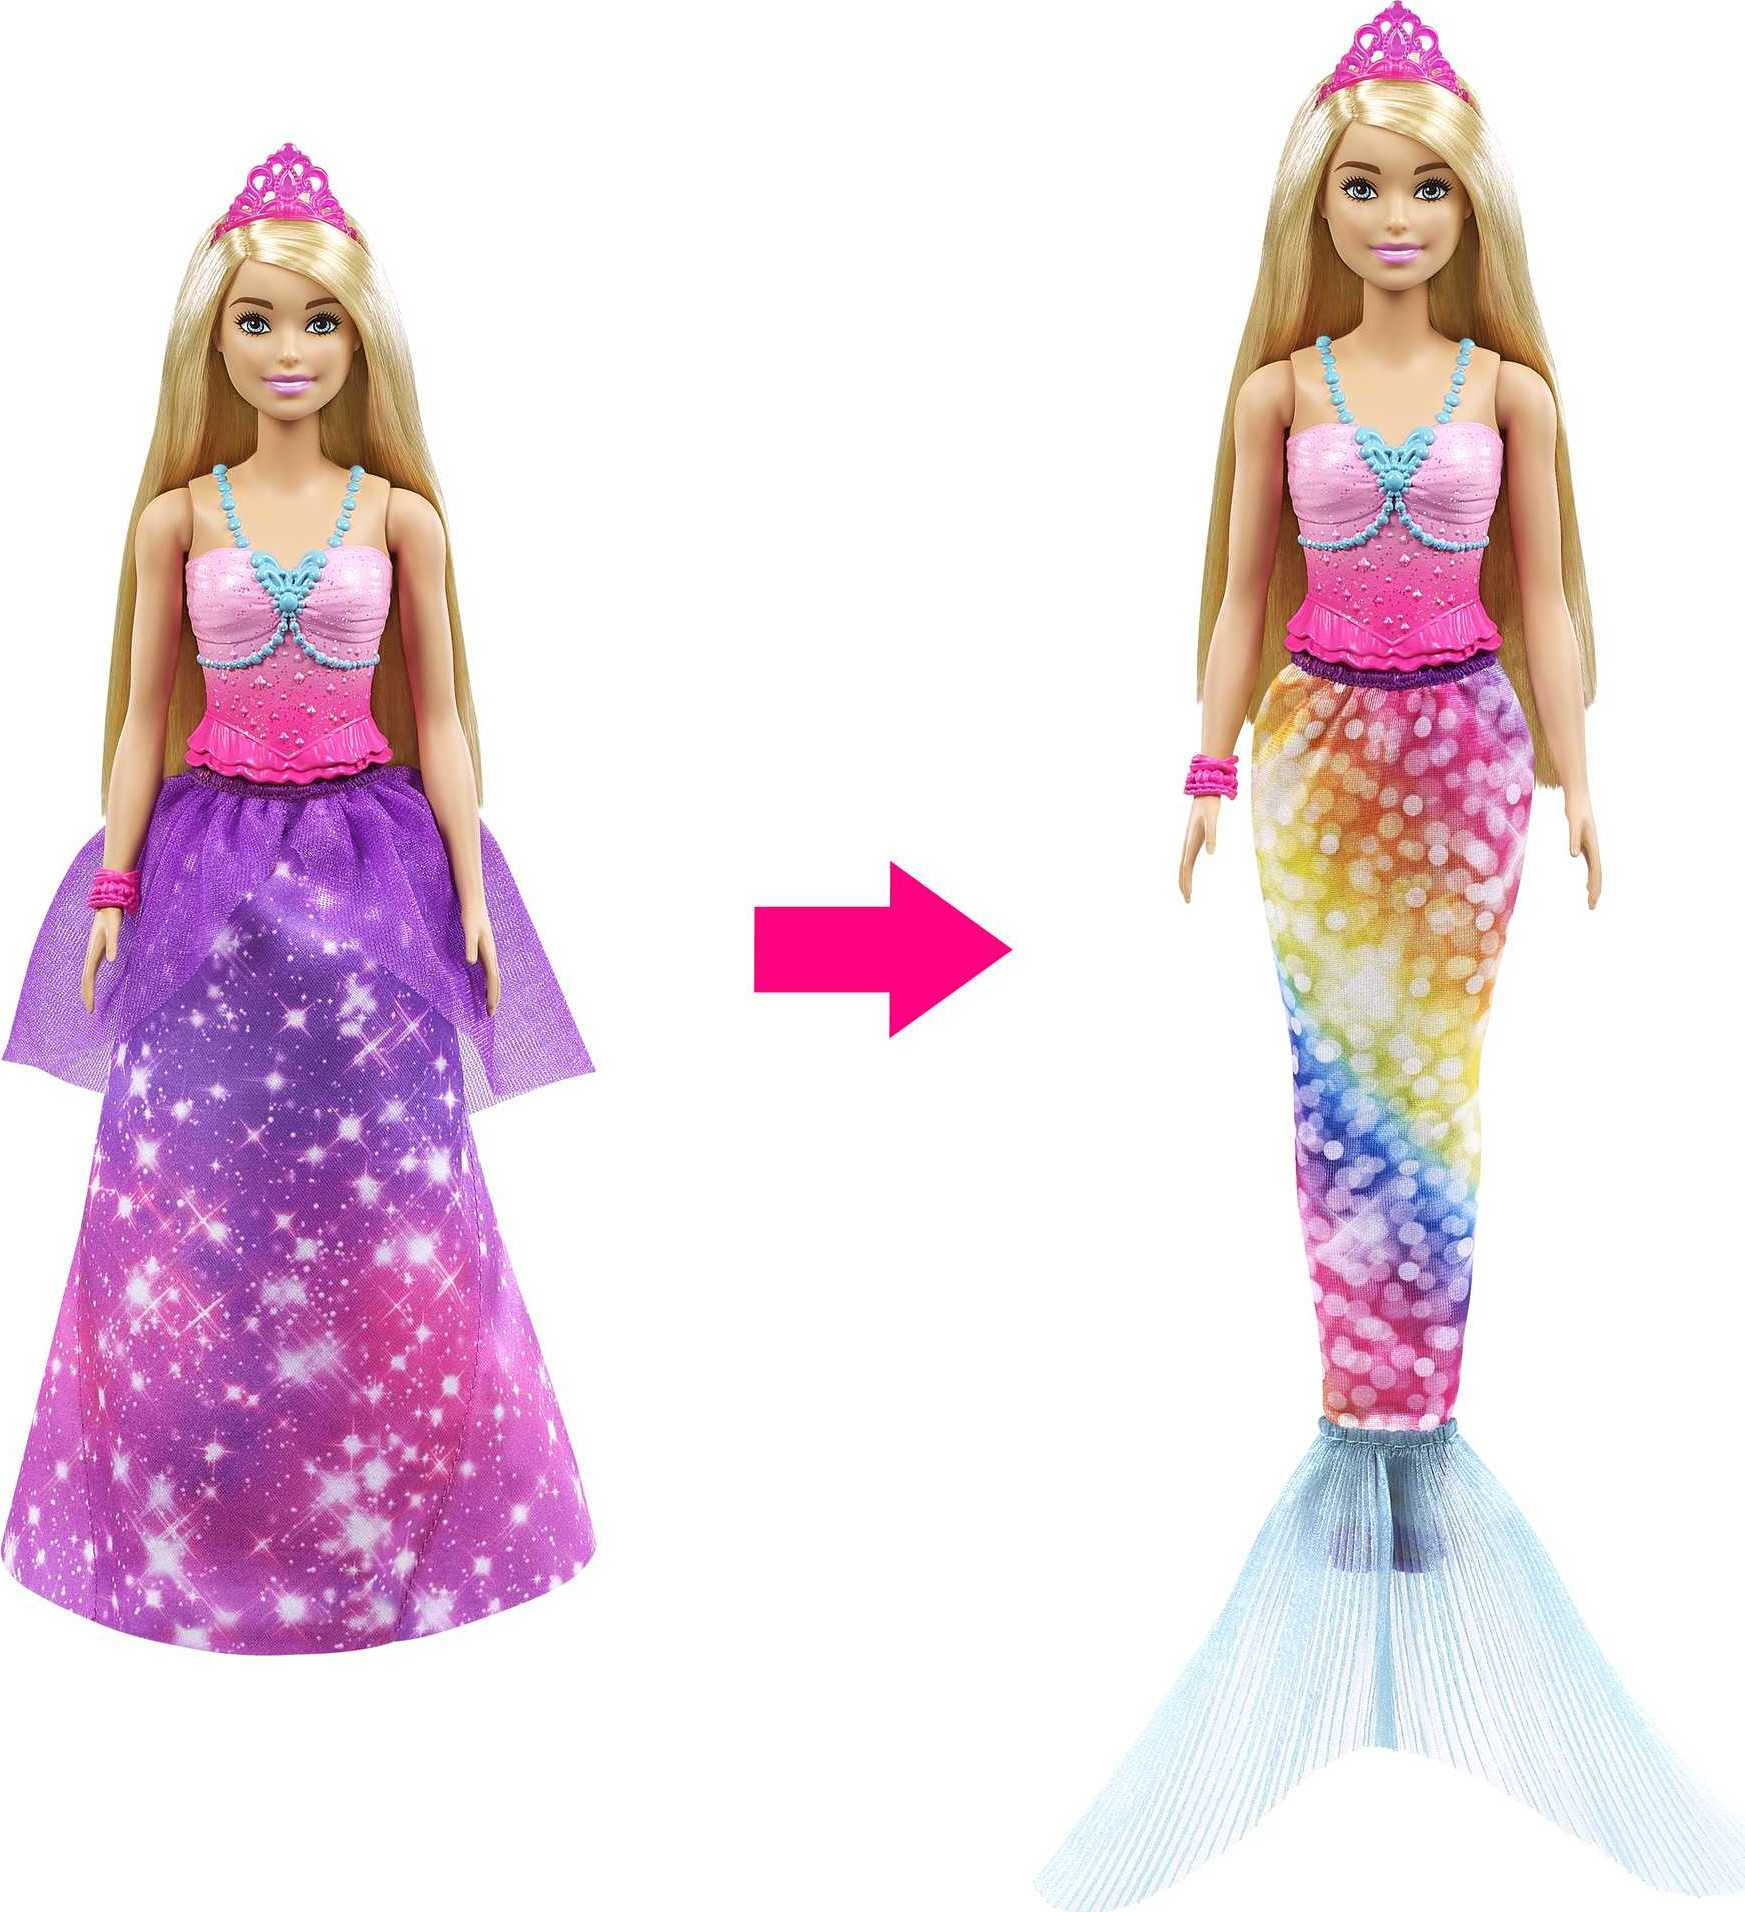 Barbie Dreamtopia Fantasy Doll, 2-in-1 Royal to Mermaid Transformation with Accessories - image 5 of 6